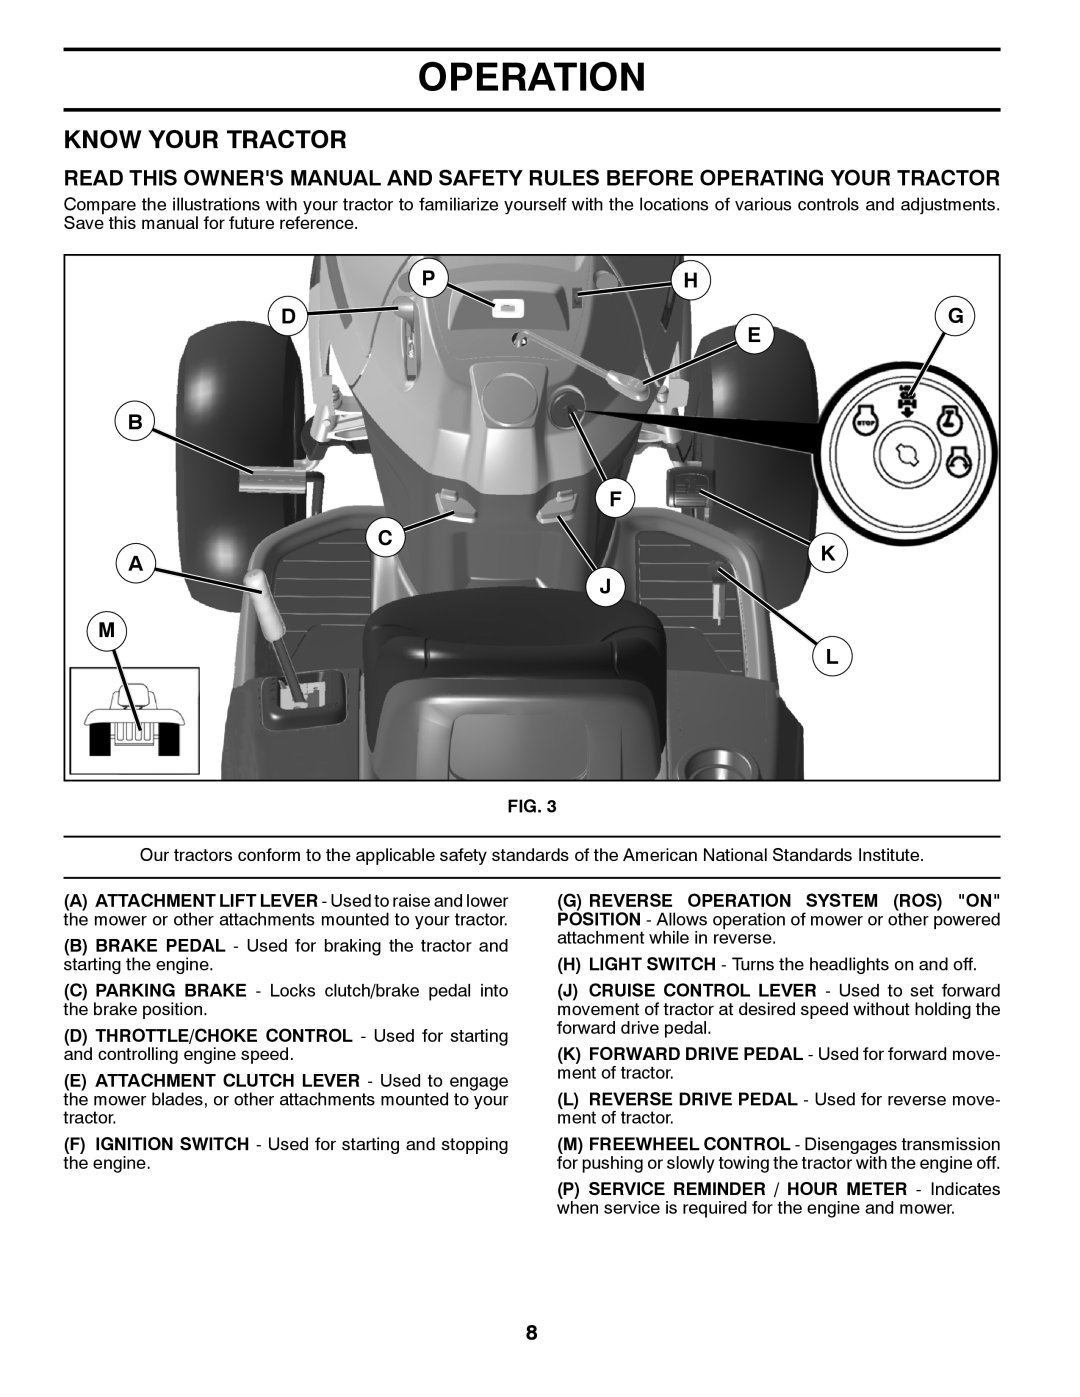 Husqvarna 96045002600, 532 43 95-58 owner manual Know Your Tractor, Ph Dg E, Operation 